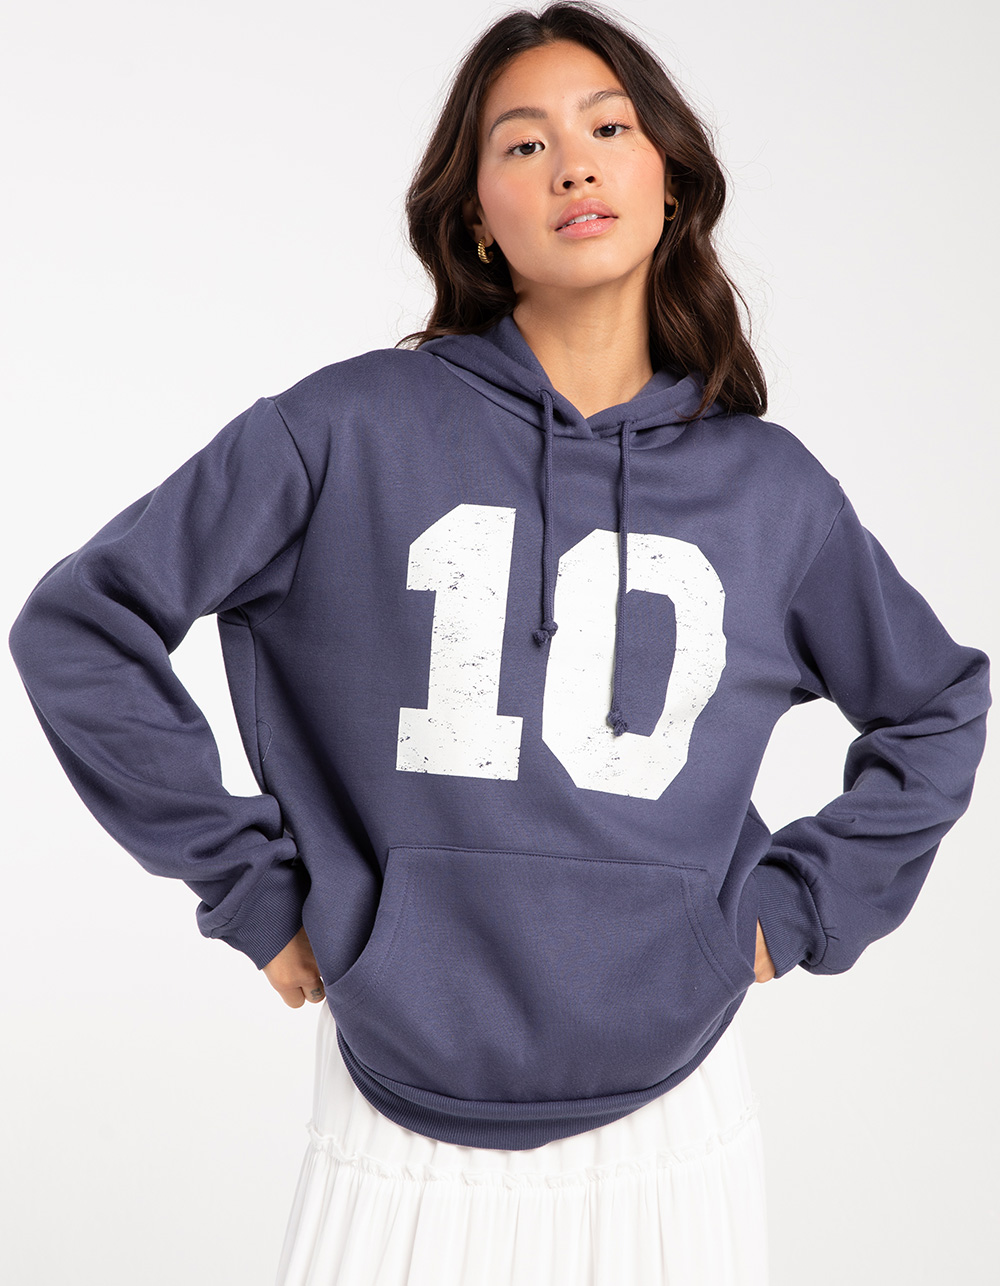 hoodies for girls: 10 best hoodies for girls under Rs. 800 - The Economic  Times